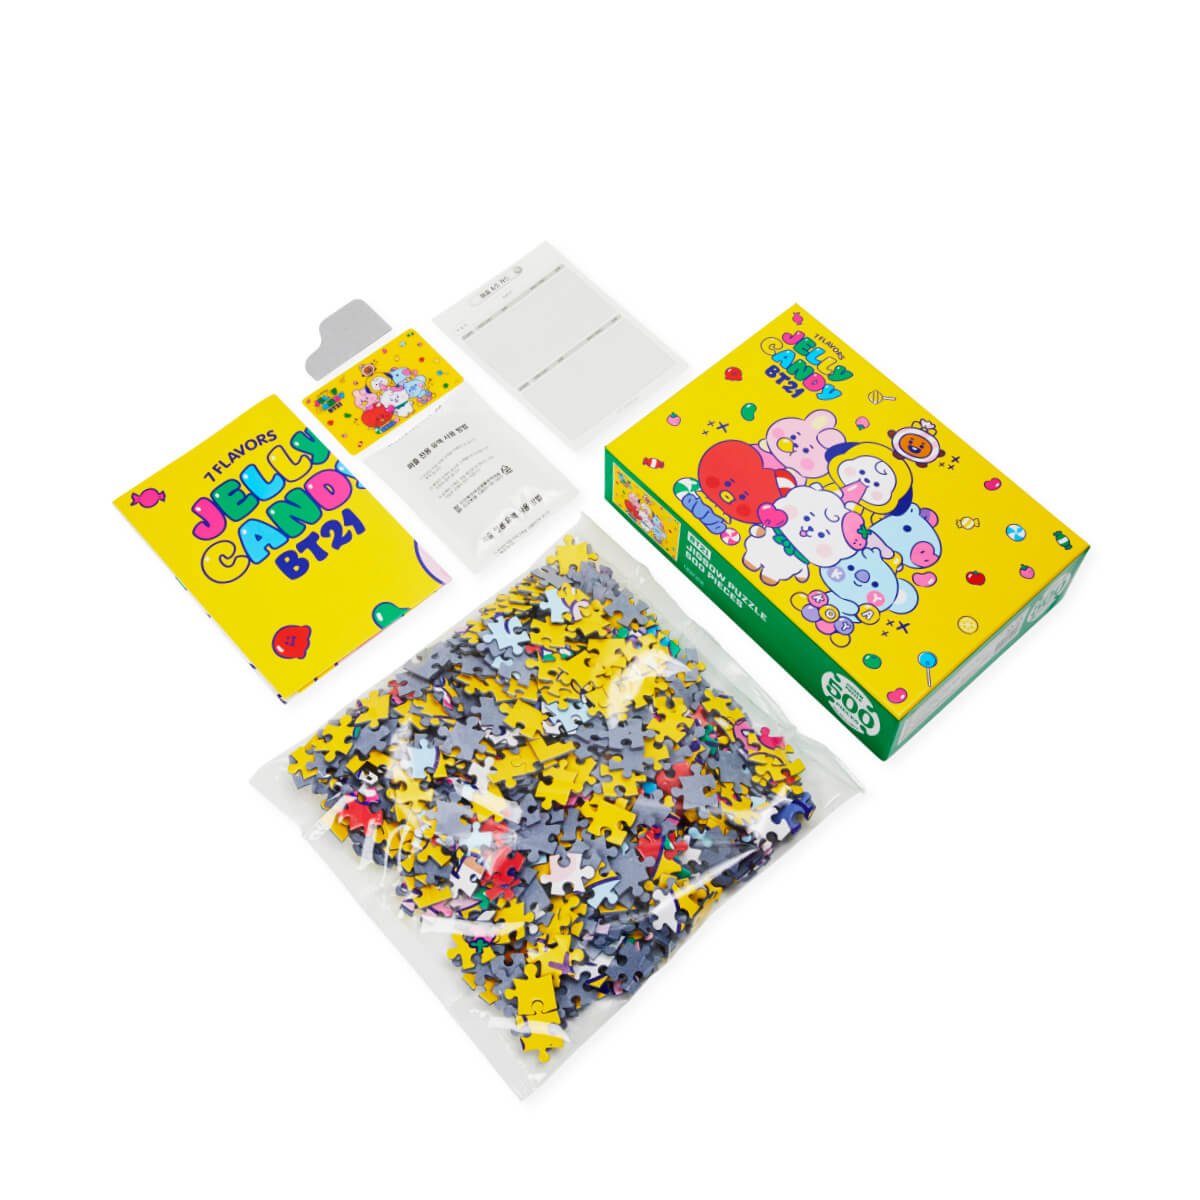 BT21 BABY Jelly Candy Jigsaw Puzzle 500 Pcs Toys - Kpop Wholesale | Seoufly